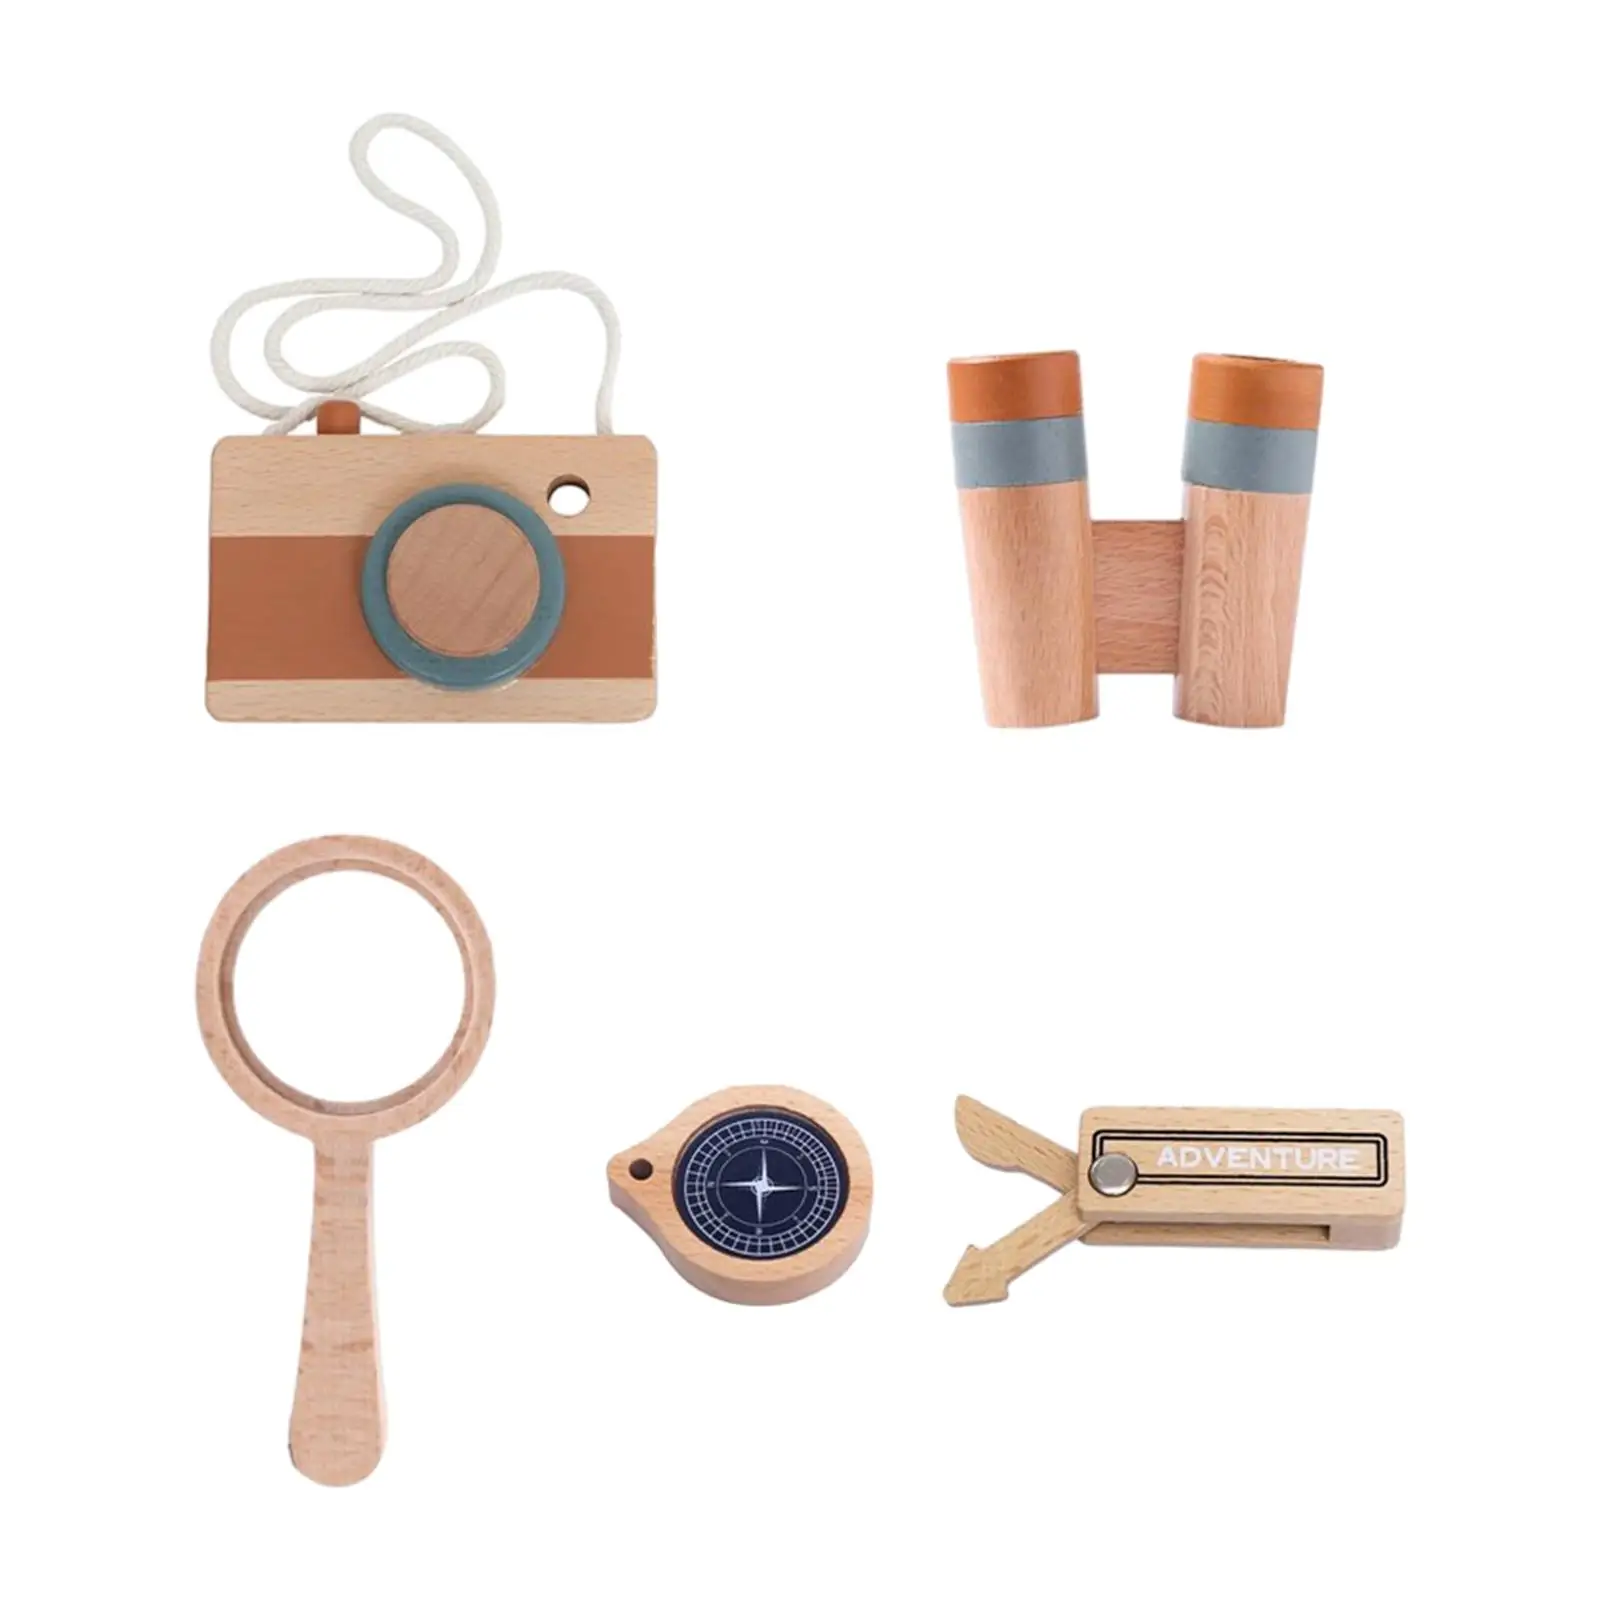 Outdoor Exploration Toys Set Wooden Magnifying Glass for Plants Animal Learning Camping Outdoor Activities Backyard Activities